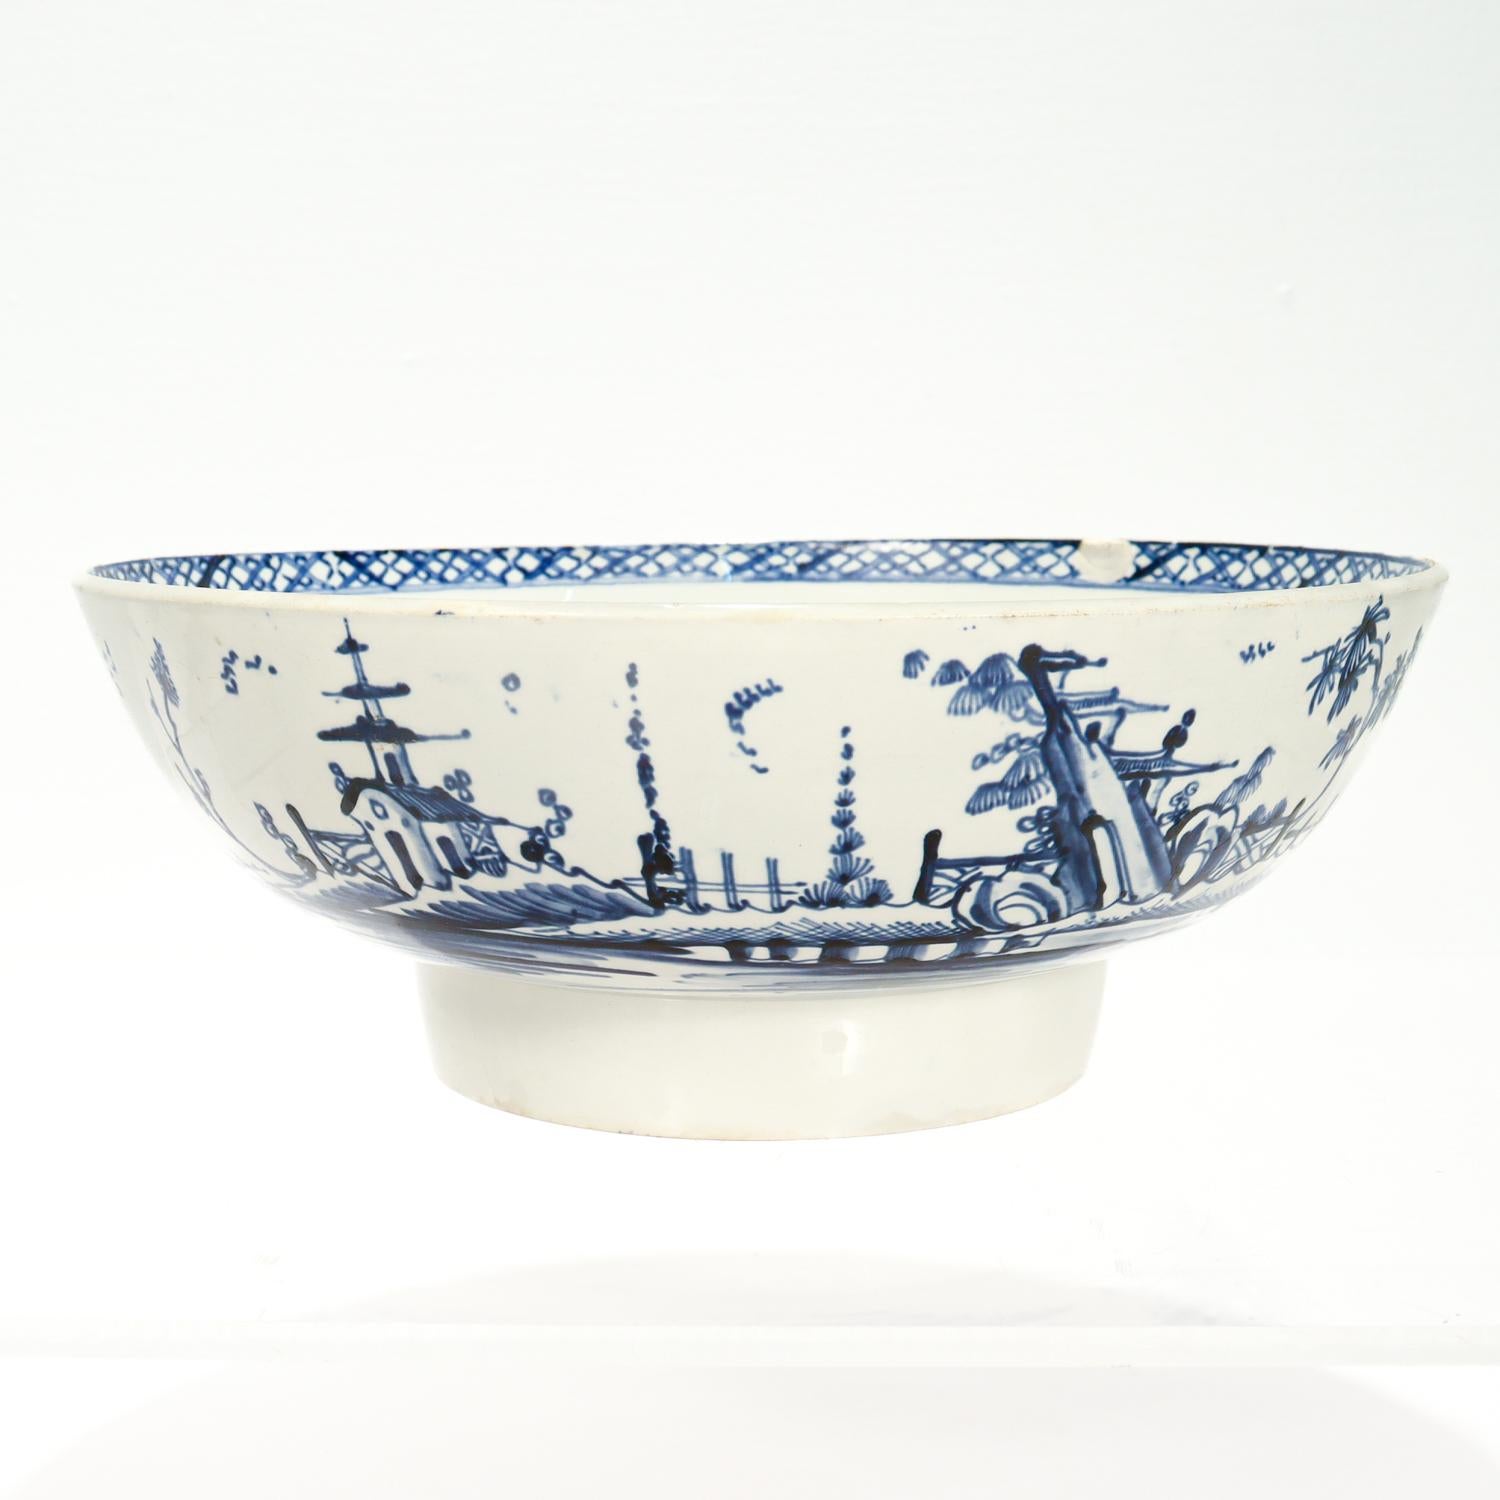 A fine antique Dutch Delft bowl.

With landscape scenes to the center and exterior of the bowl, and a geometric border to the rim.

With an old note to the bottom that reads: 